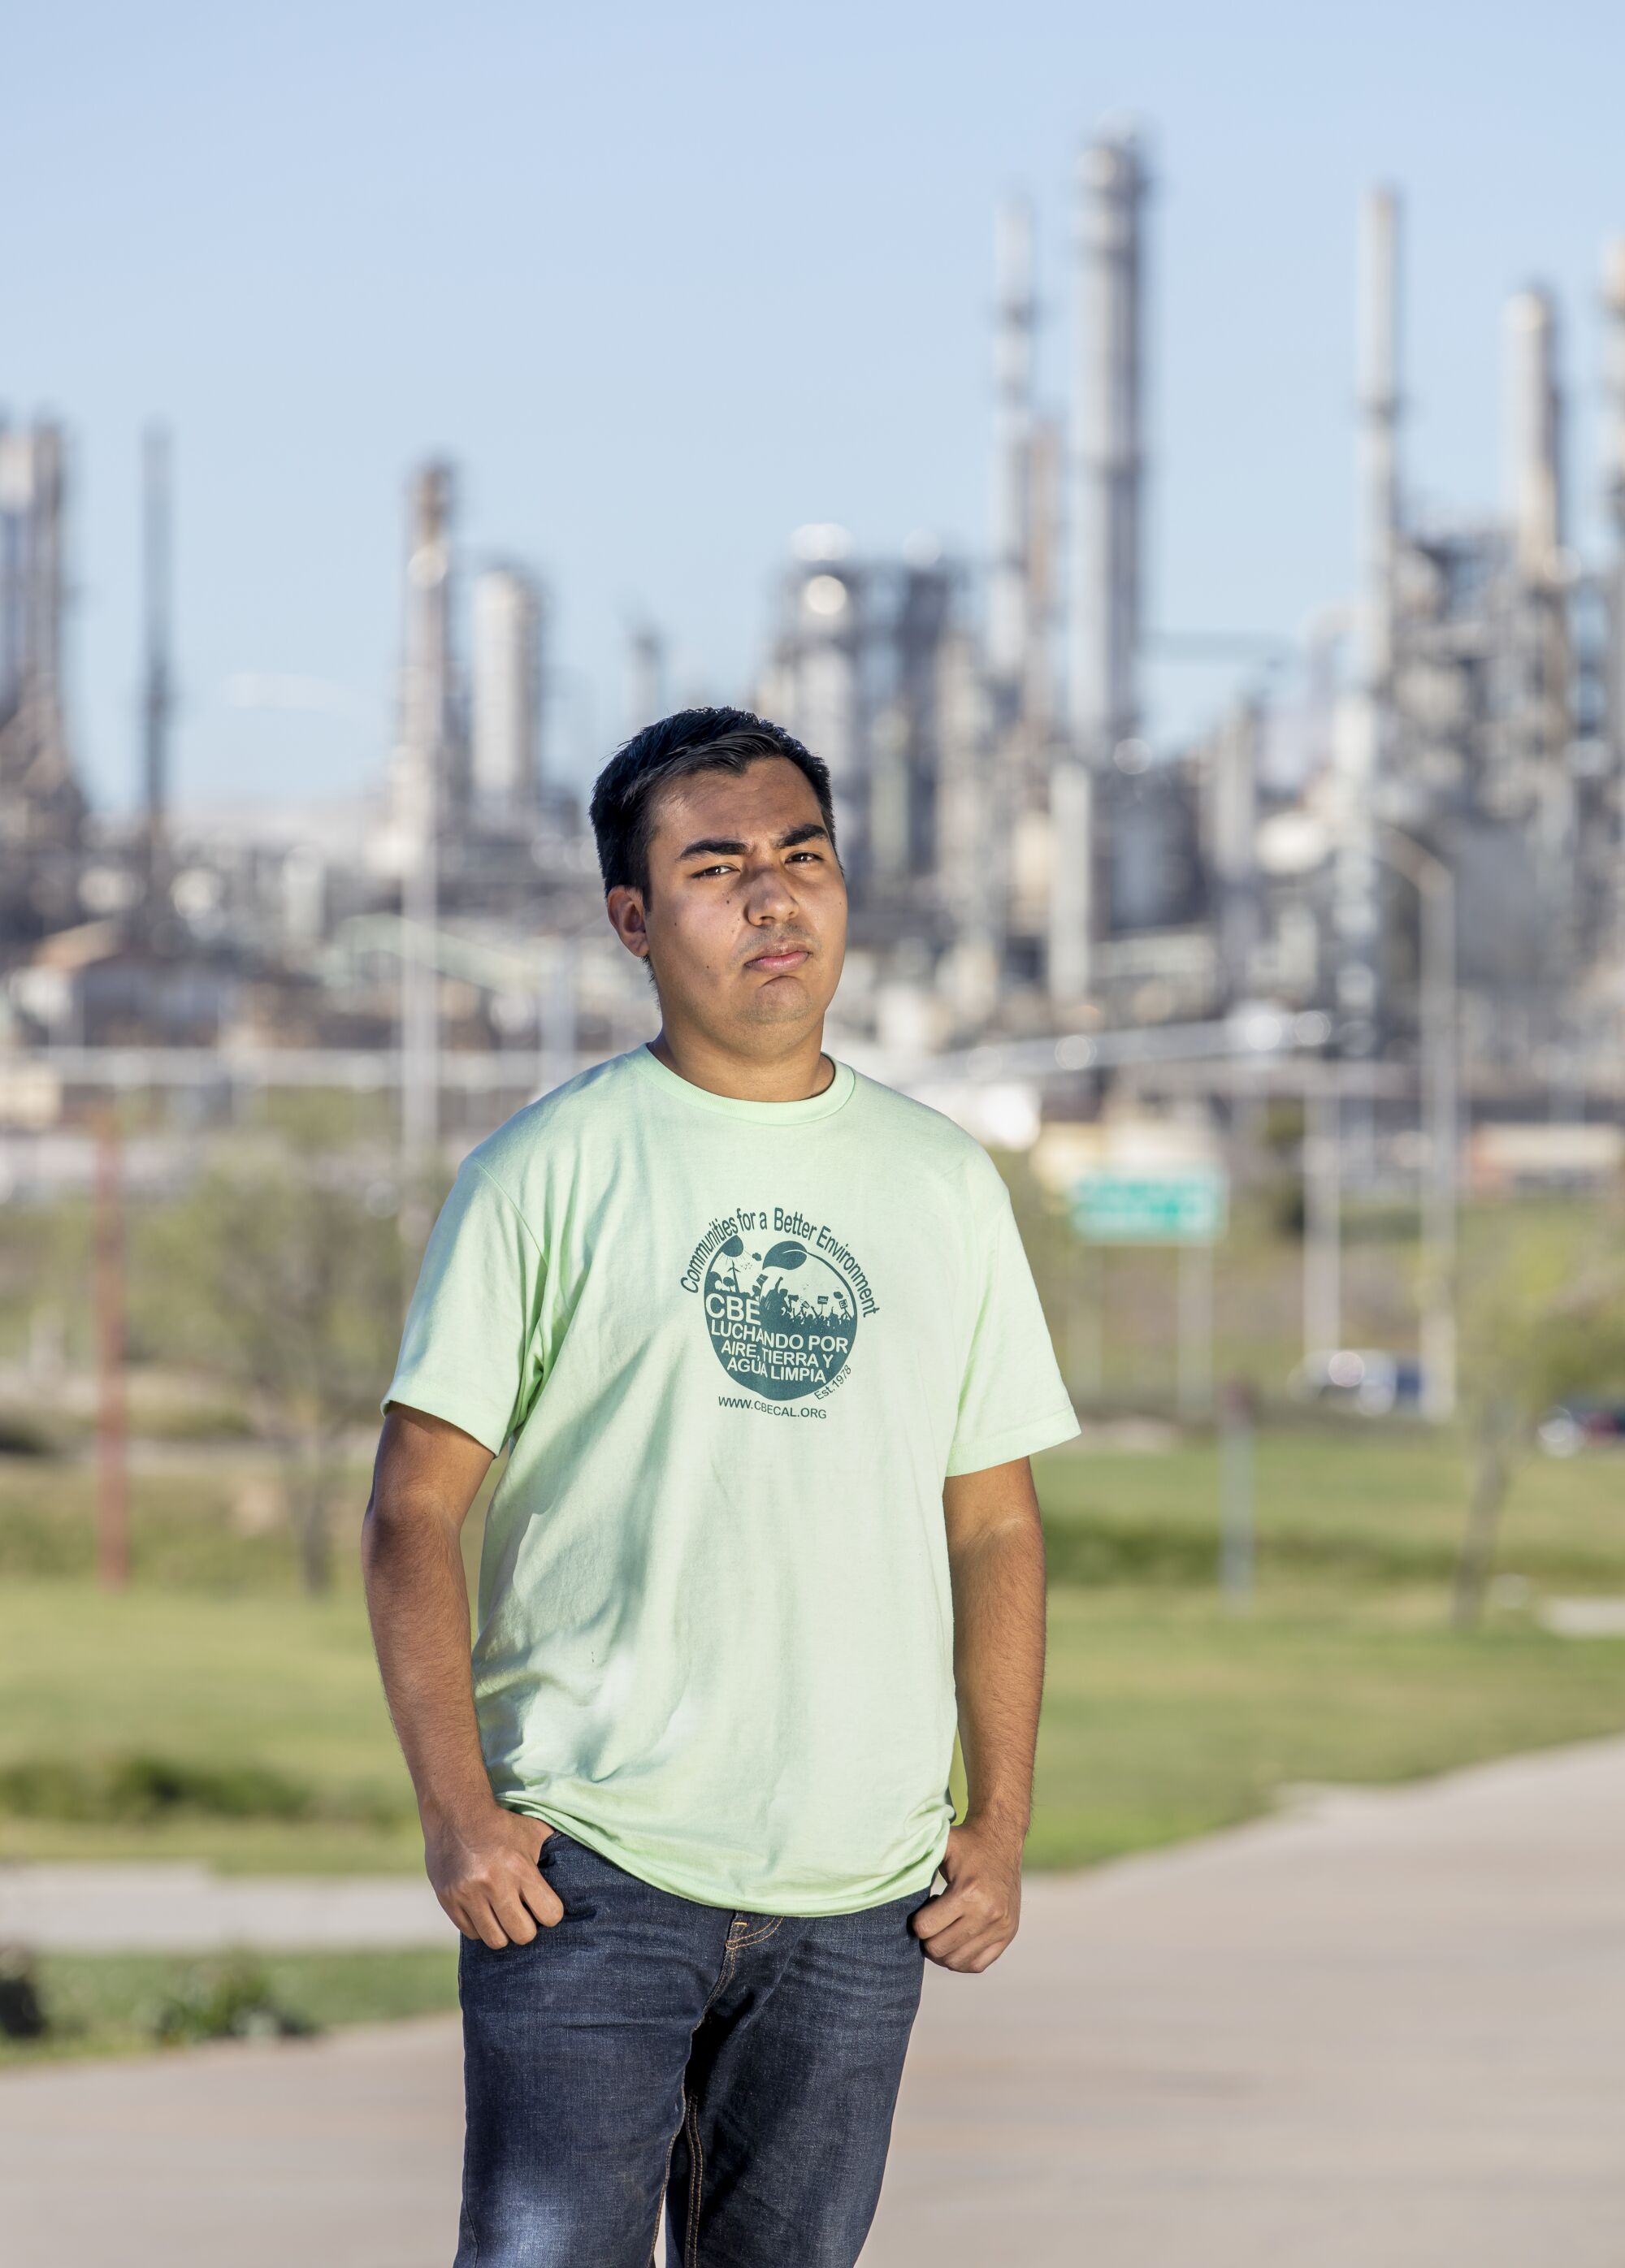 A young man stands with an oil refinery in the background